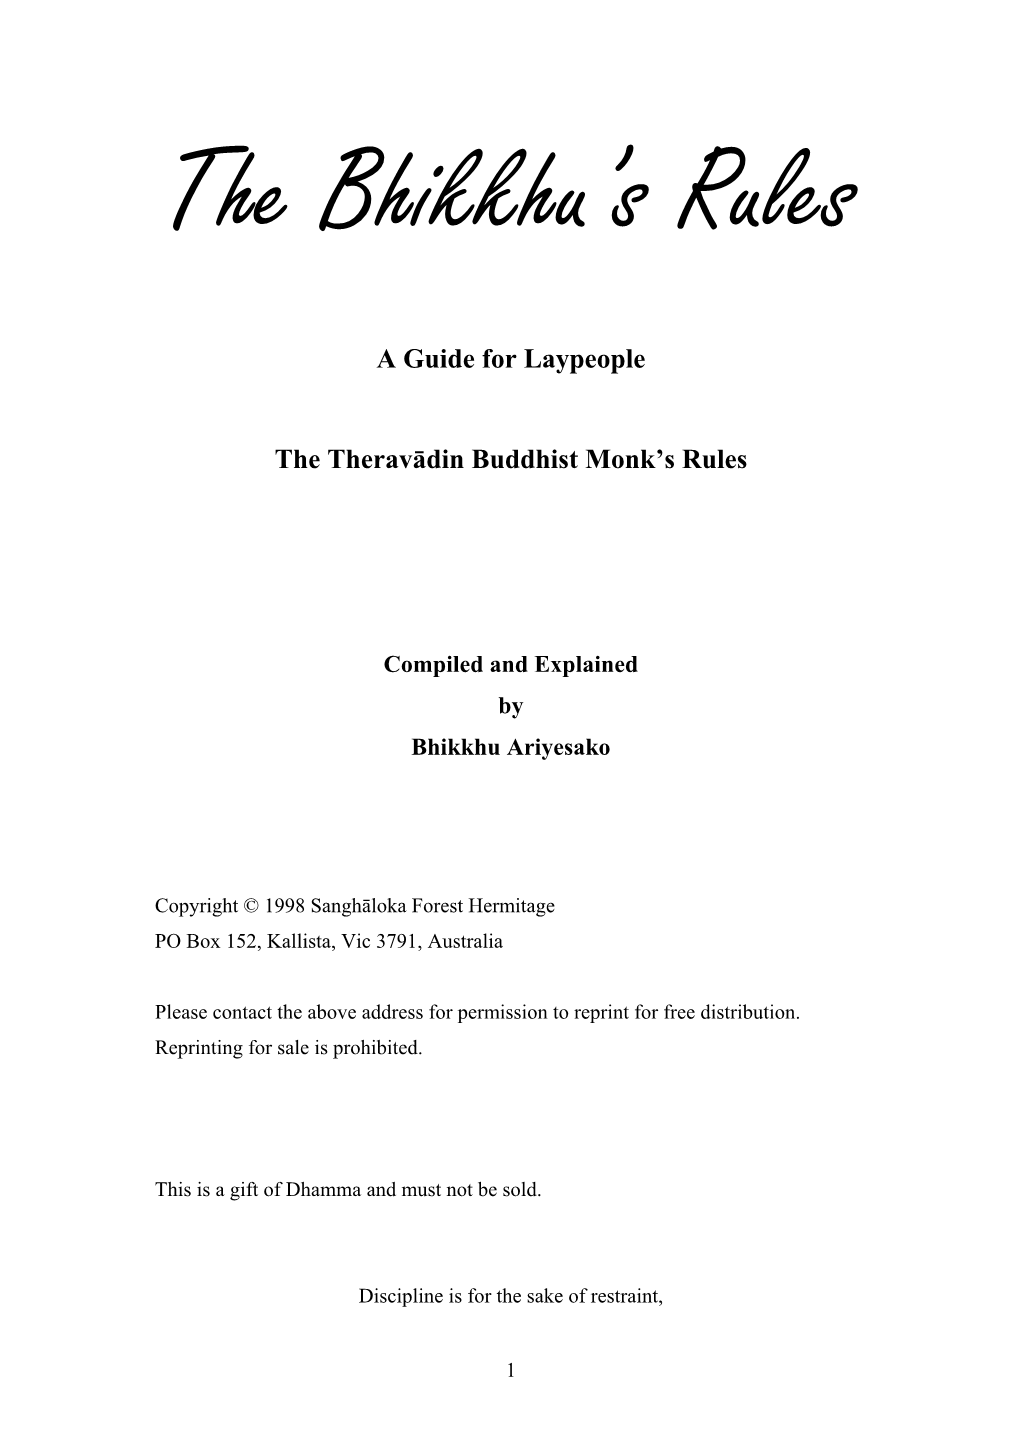 The Bhikkhus' Rules